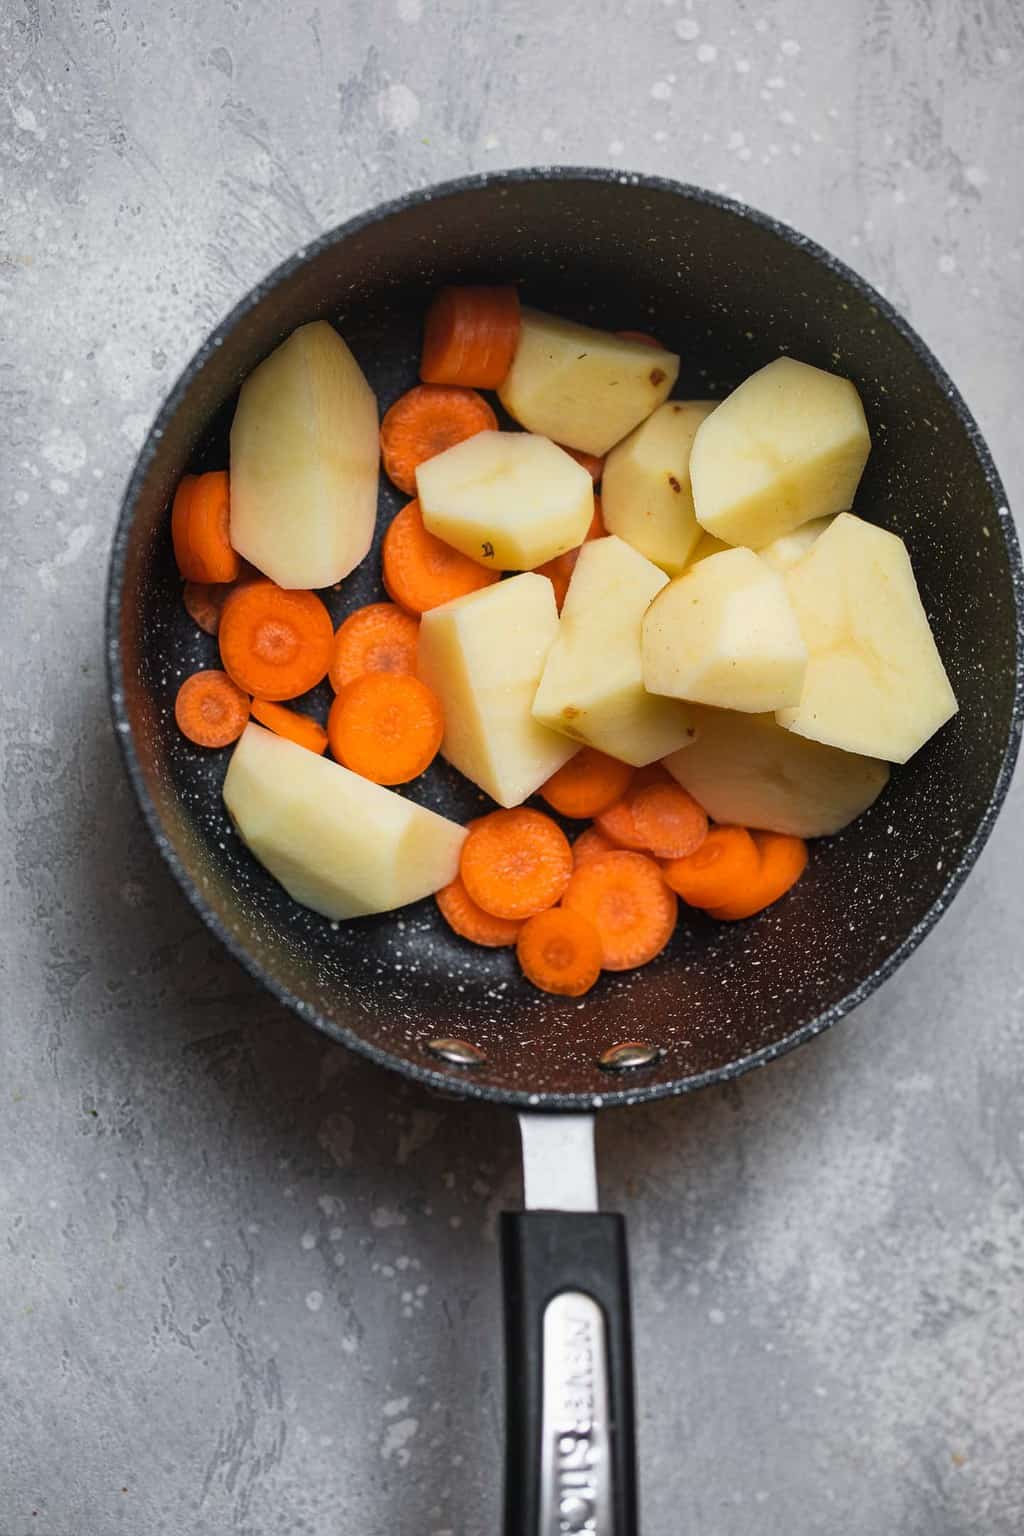 Carrots and potatoes in a saucepan